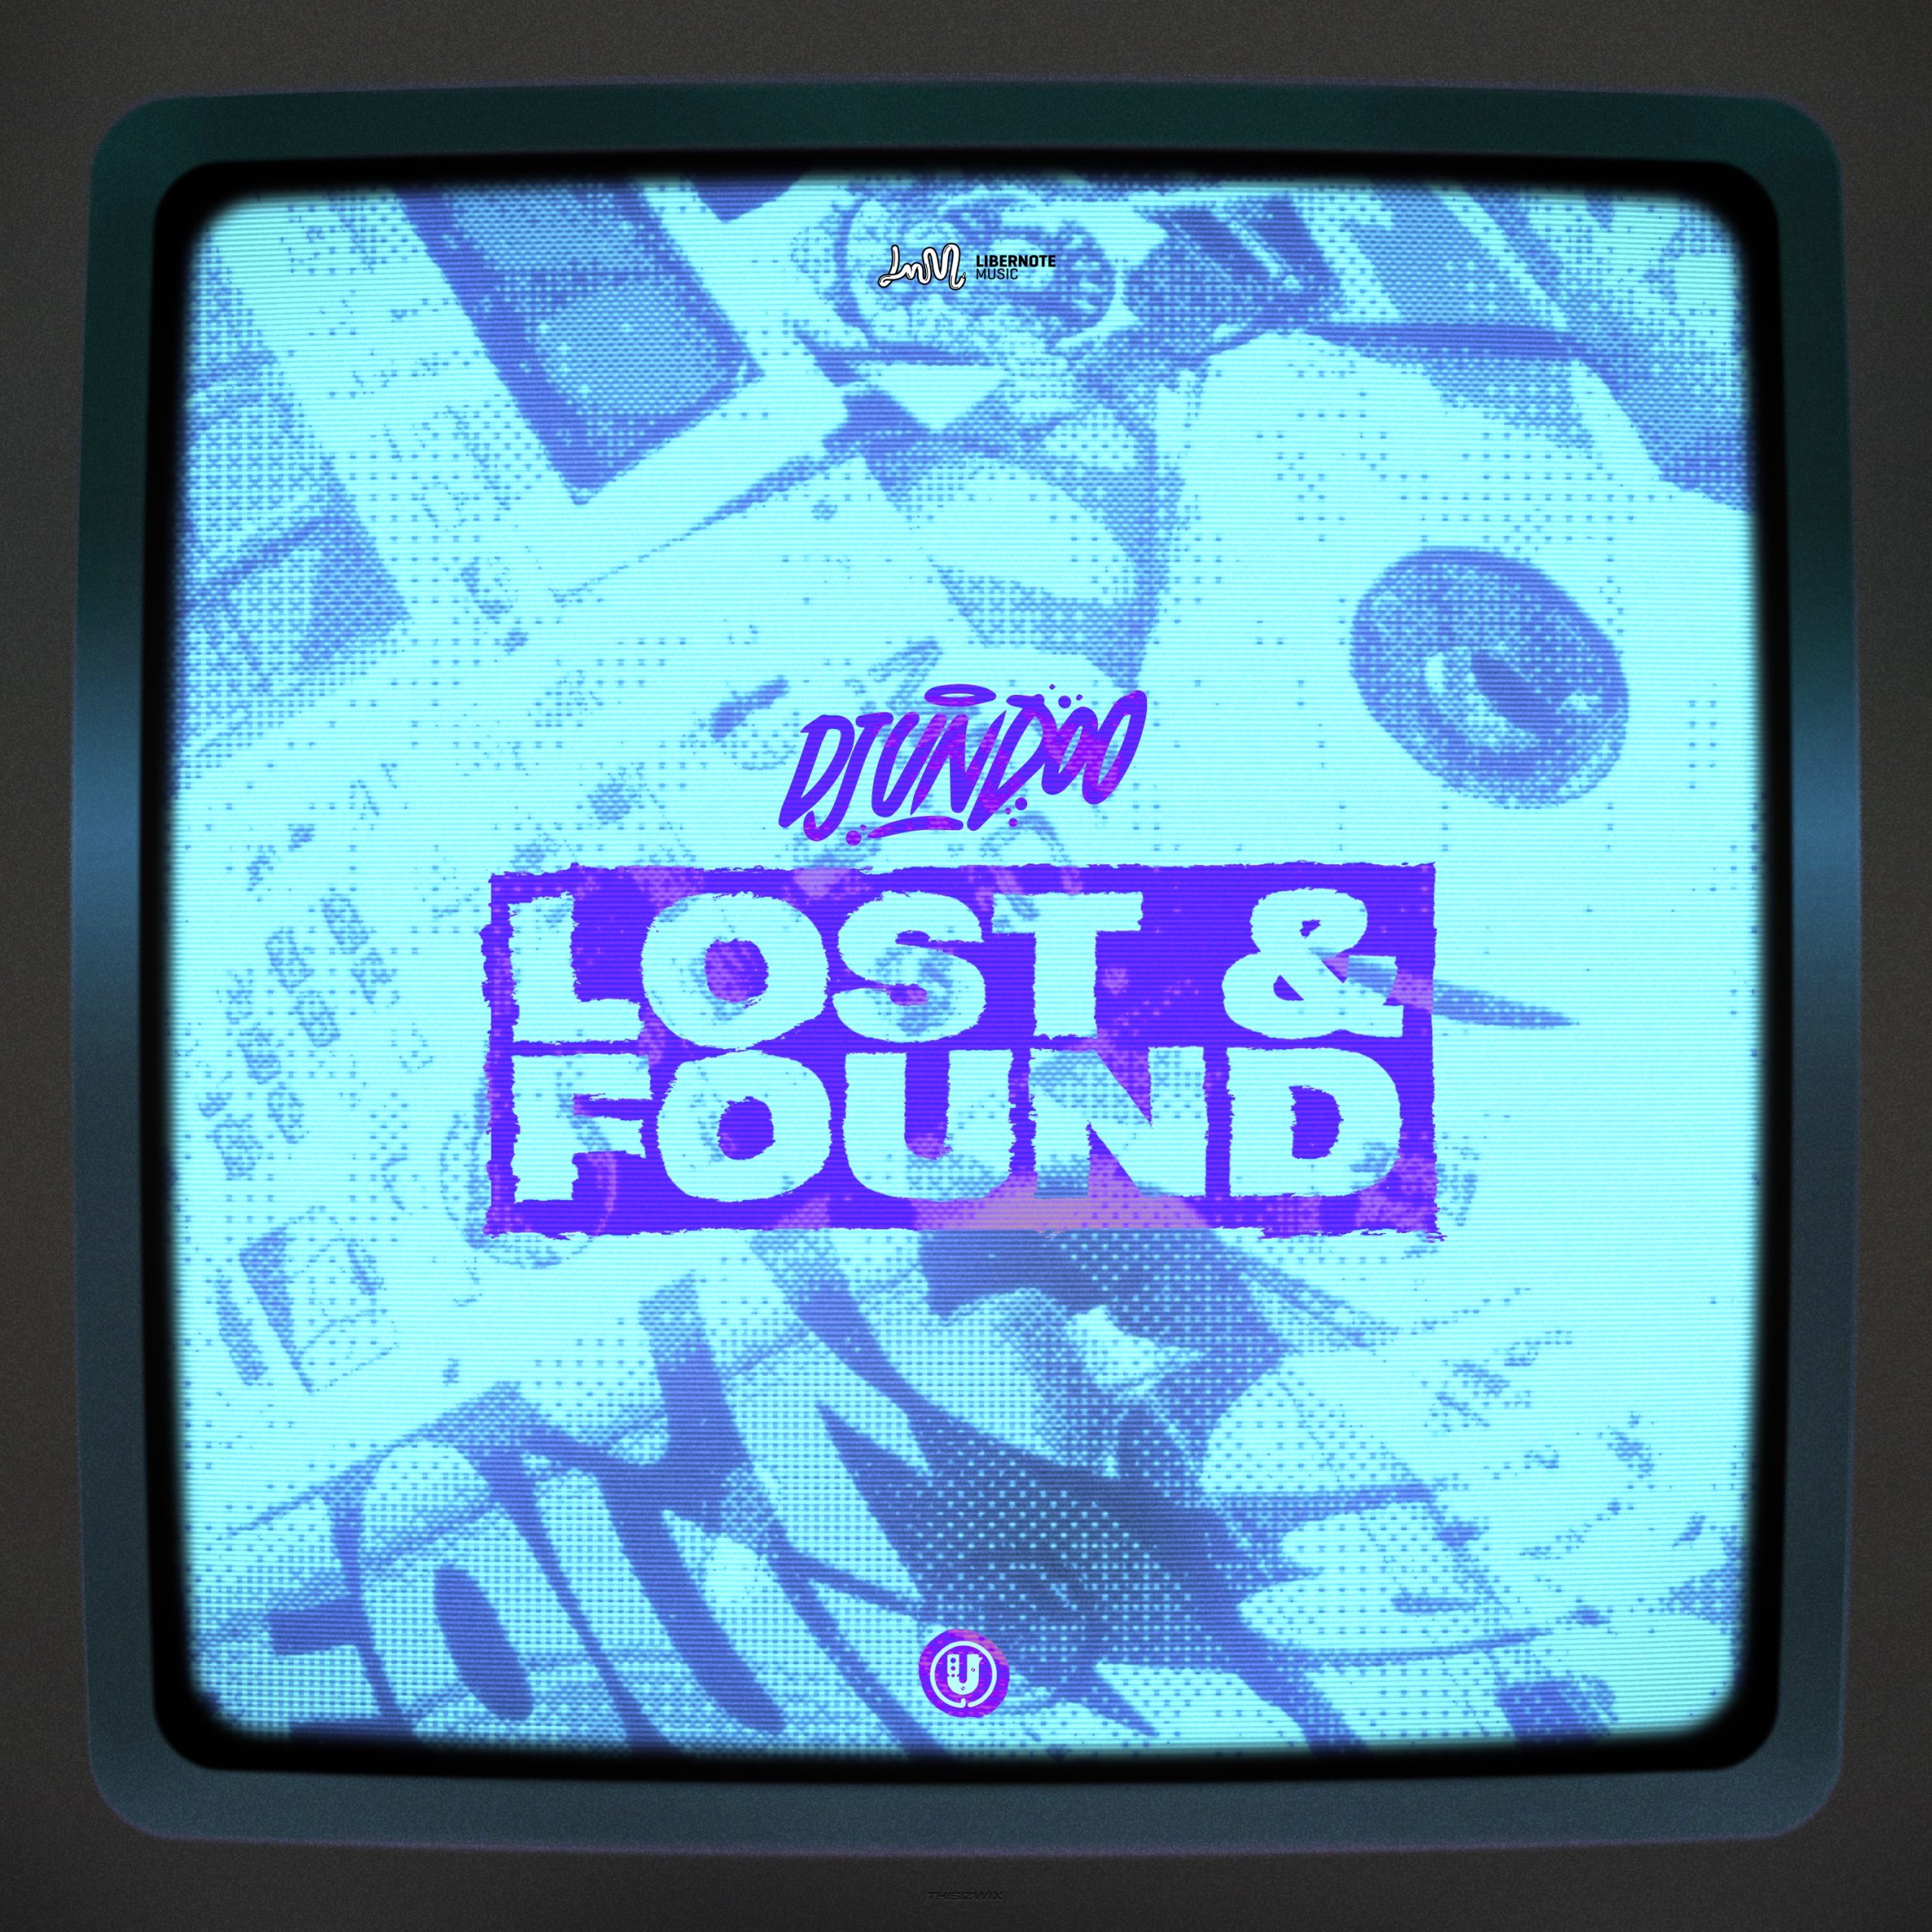 LOST & FOUND - Out Now